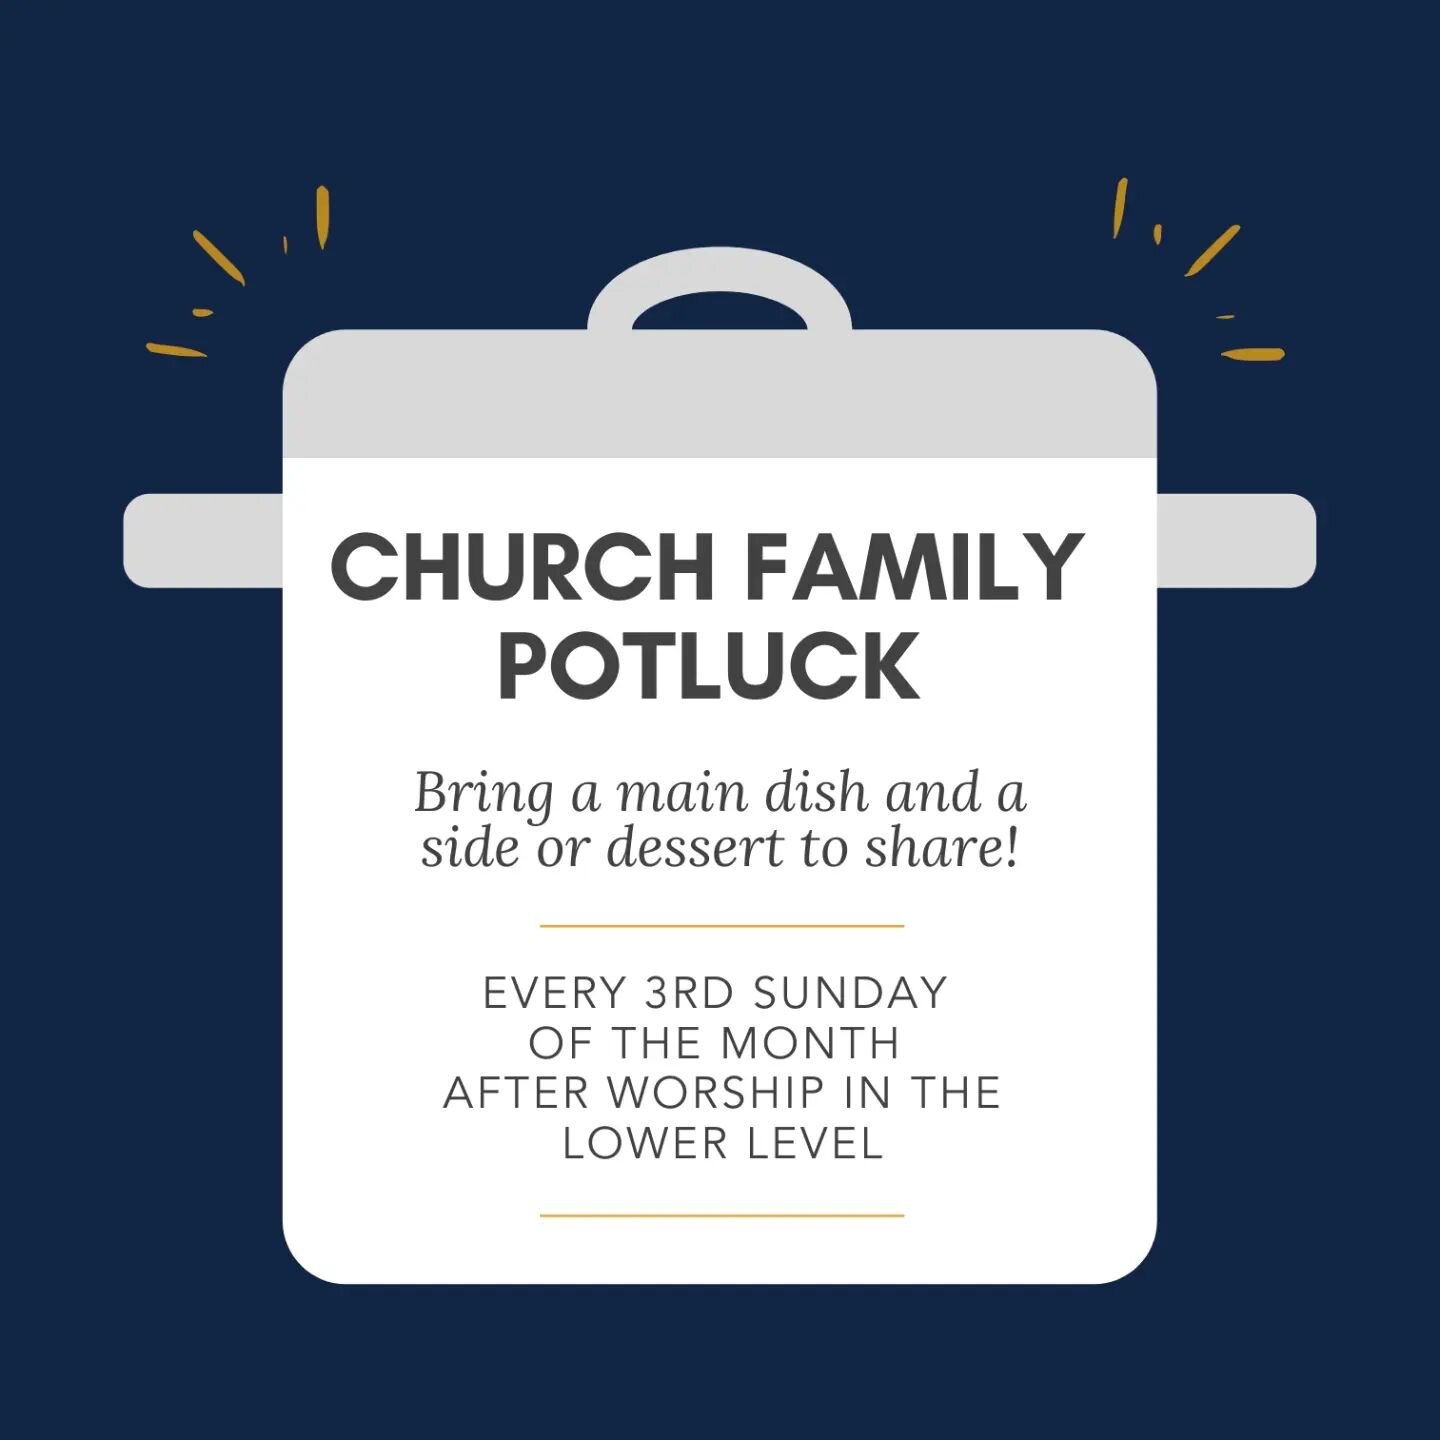 It's time to share a meal together THIS Sunday - as we do once a month after worship! Bring something to share and join us in the lower level for some yummy food and time with friends! 
#forwilm #ccwilm